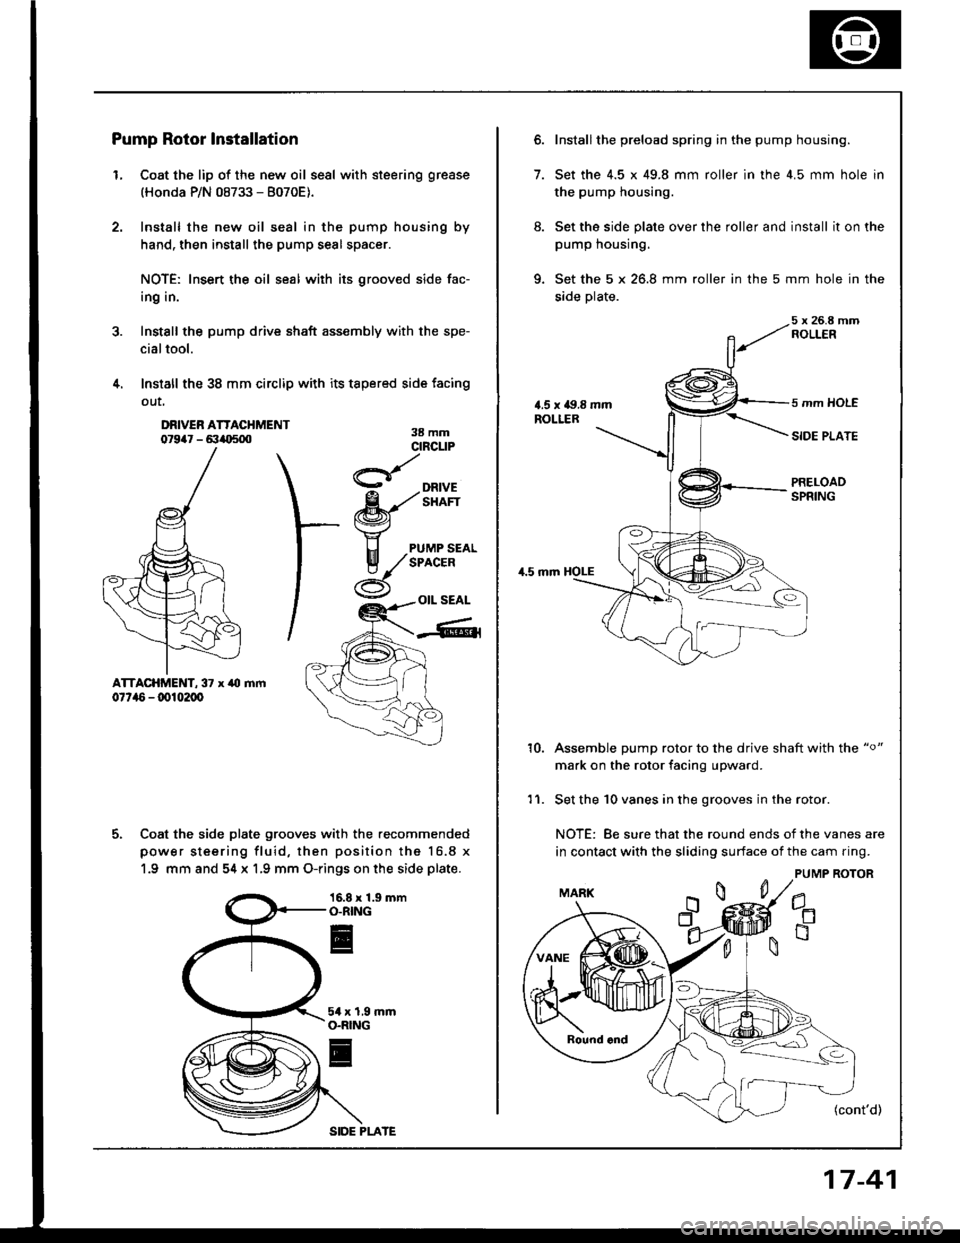 HONDA INTEGRA 1994 4.G Workshop Manual Pump Rotor Installation
L Coat the lip of the new oil seal with steering grease
(Honda P/N 08733 - 8070E).
Install the new oil seal in the pump housing by
hand, then install the pump seal spacer.
NOTE